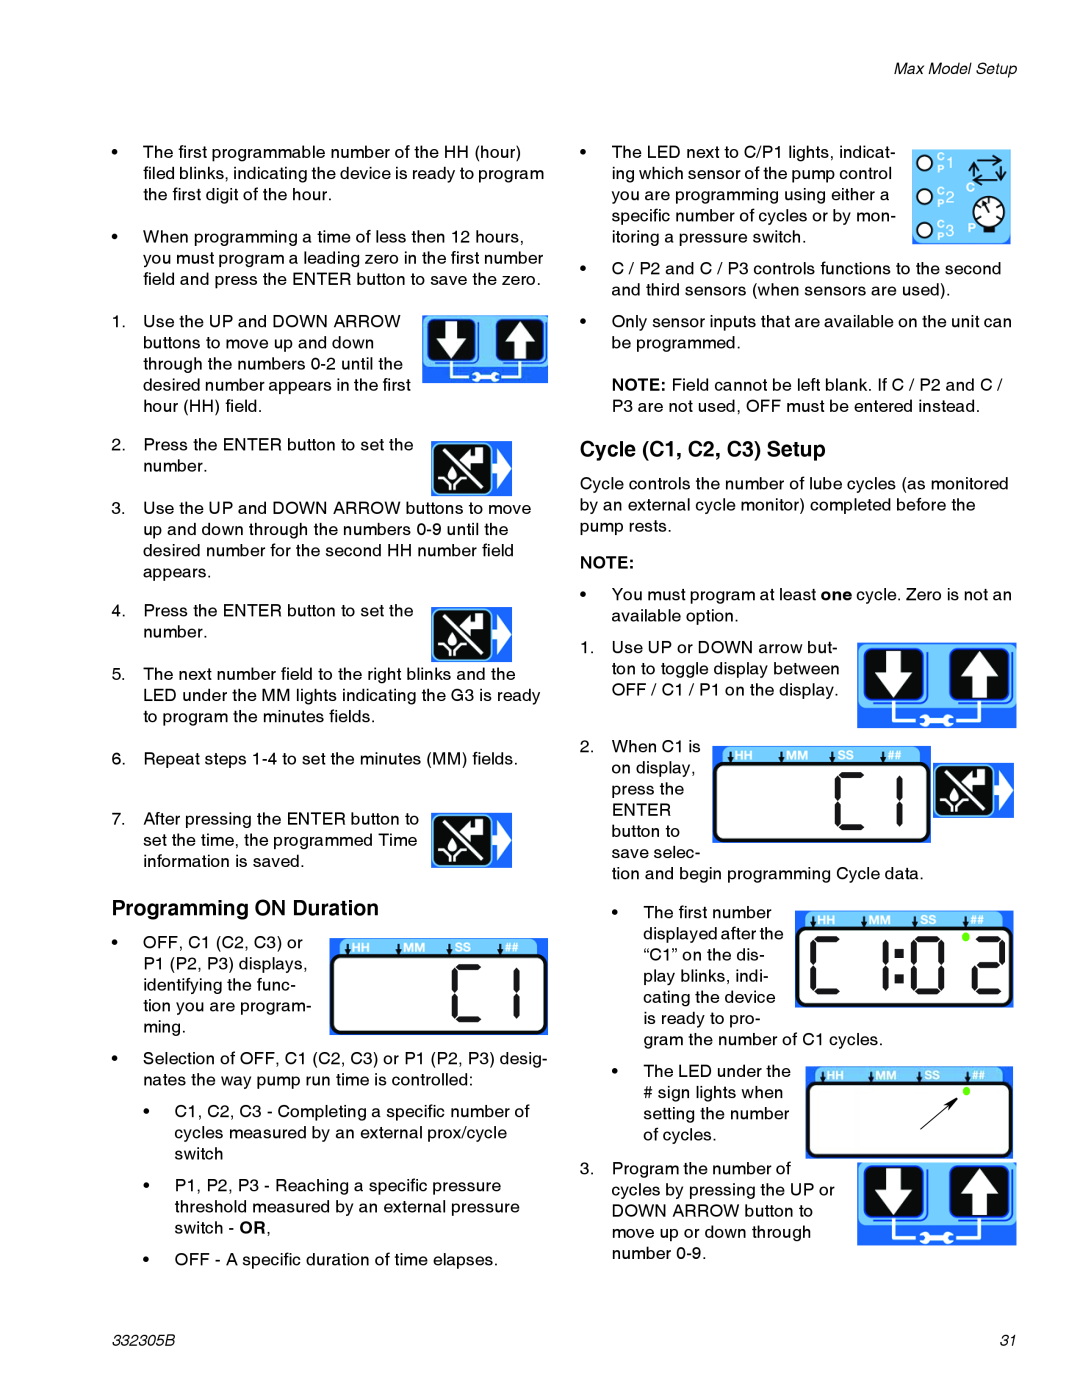 Graco 332305B important safety instructions Programming ON Duration, Cycle C1, C2, C3 Setup 